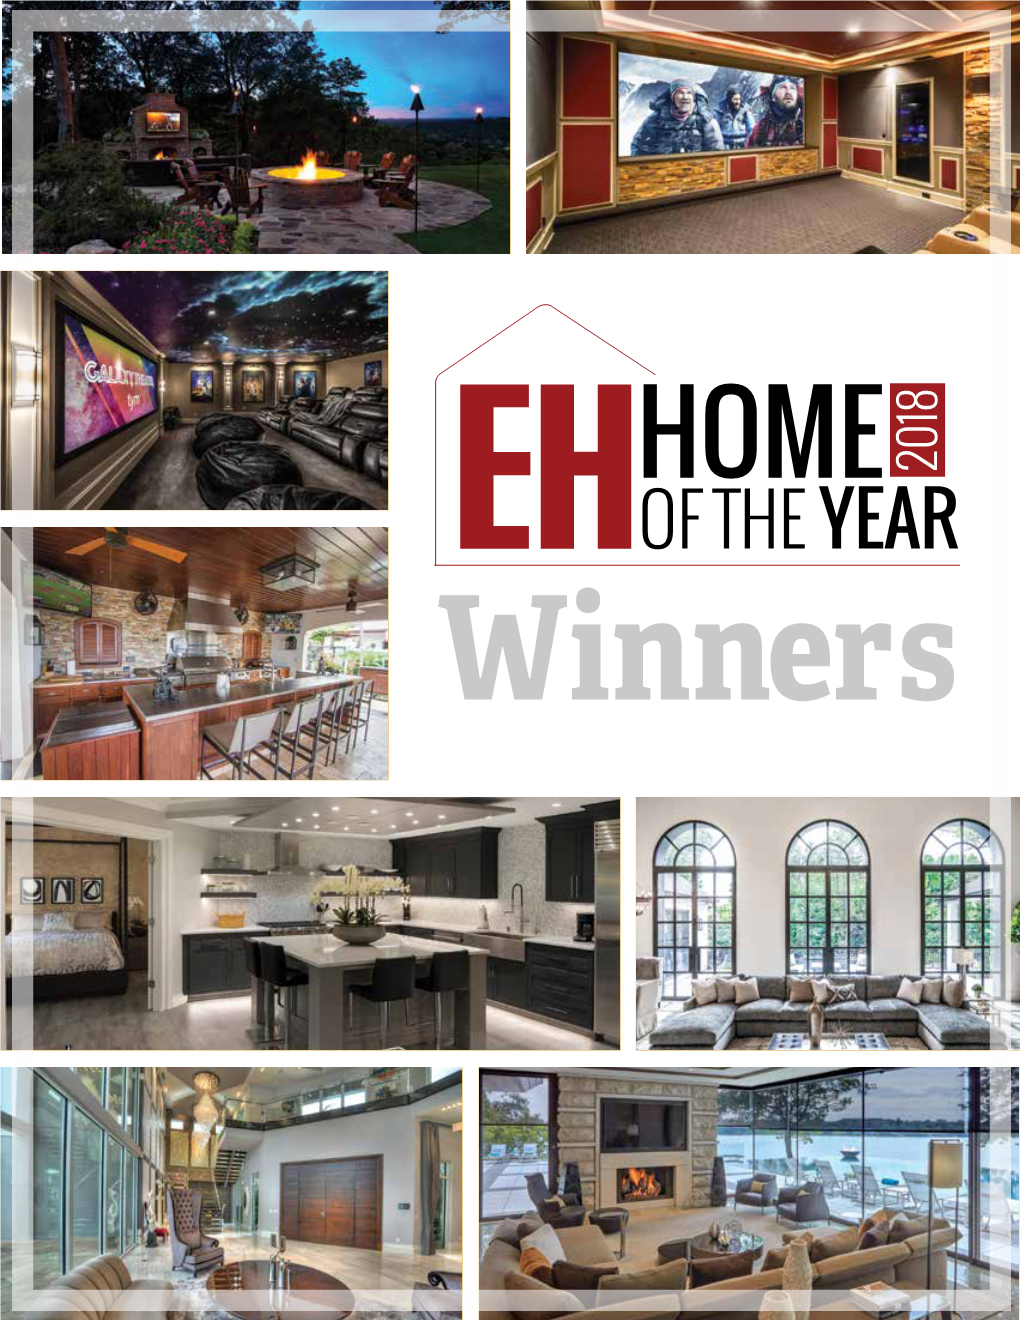 Download PDF with “EH Home of the Year Winners 2018 Special”